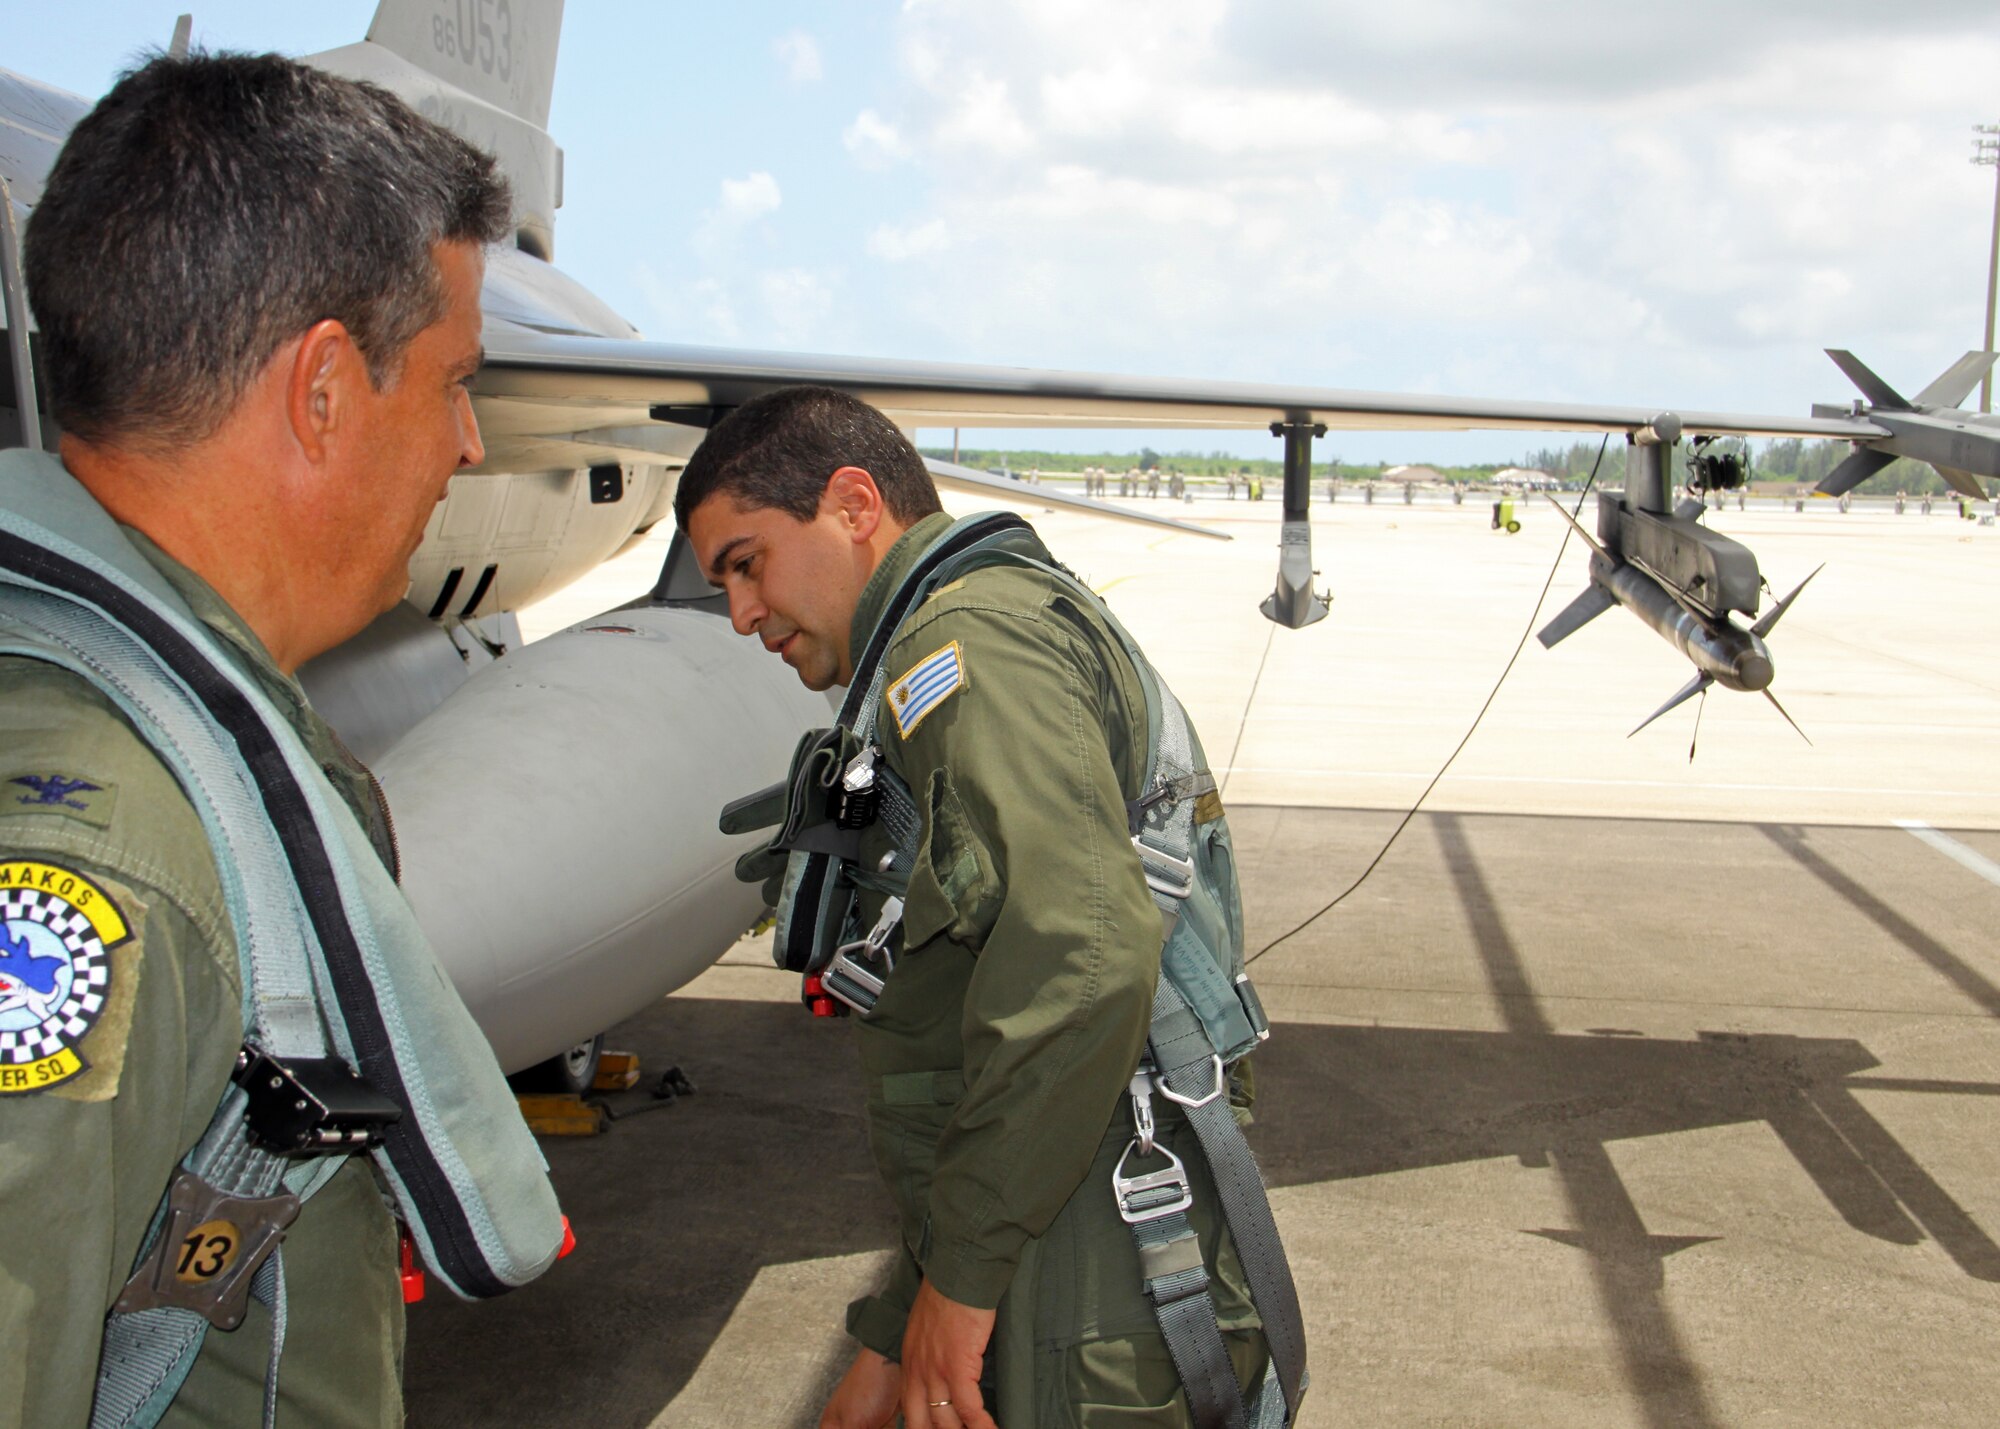 Uruguay Air Force Capt. Patrick Jaimez prepares for a subject matter expert exchange flight on Homestead Air Reserve Base, Fla,, July 26, 2010. The F-16D was piloted by Col. Jose Monteagudo, 482nd Fighter Wing Vice Commander. Capt. Jaimez was one of five Uruguayan Air Force pilots who took part in a three day visit to Homestead ARB as part of an ongoing exchange program. (U.S. Air Force photo/Ian Carrier)